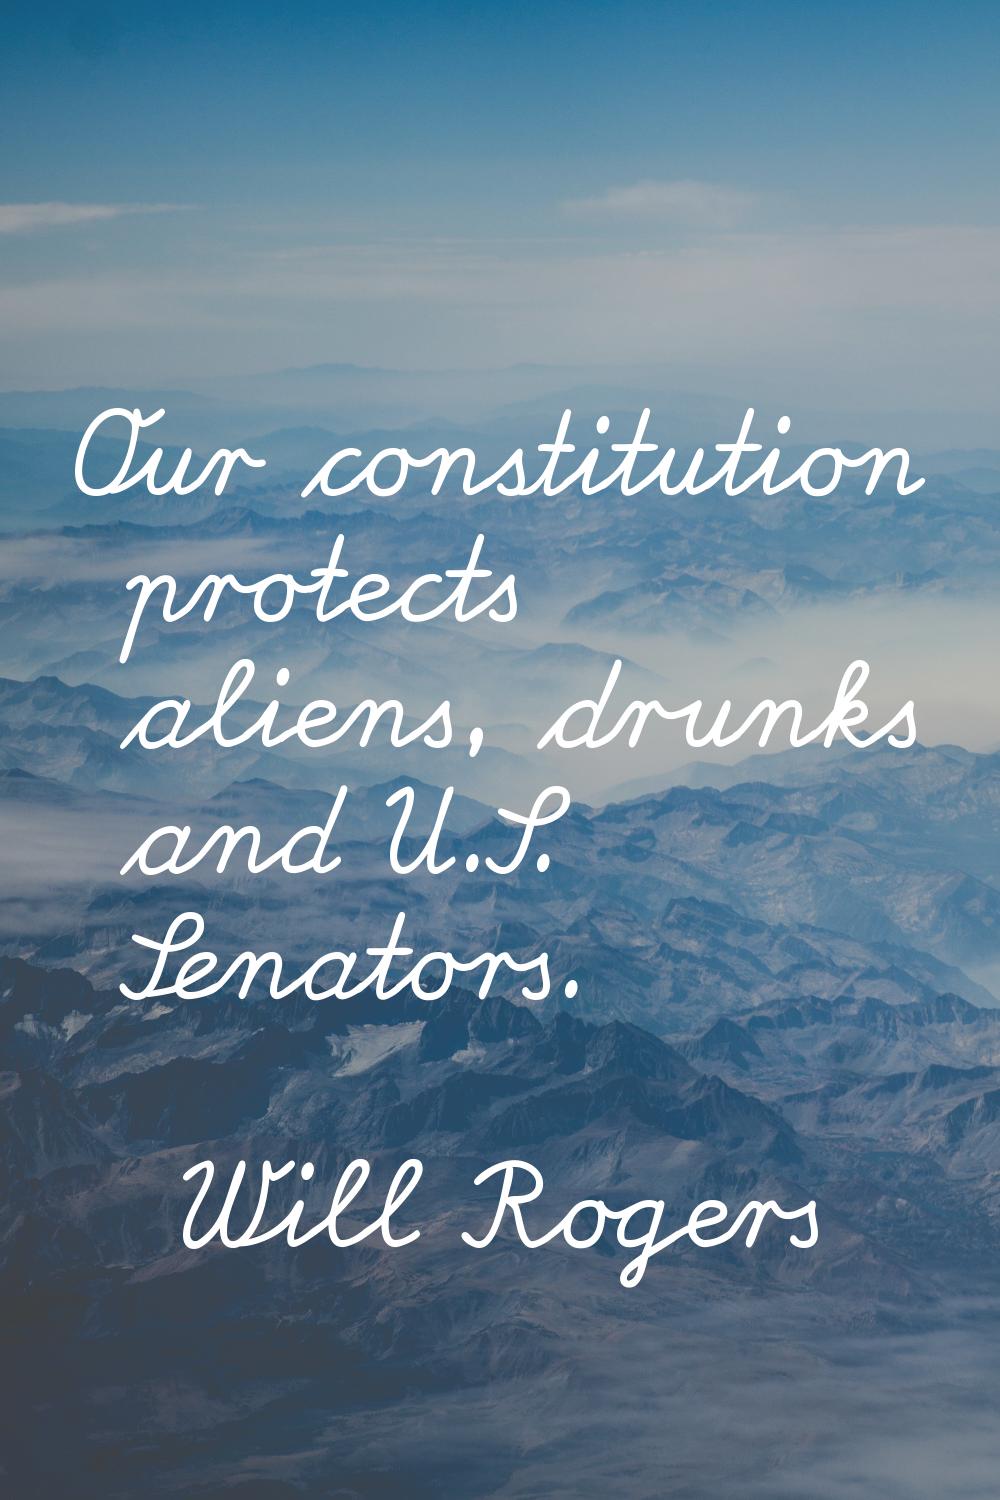 Our constitution protects aliens, drunks and U.S. Senators.